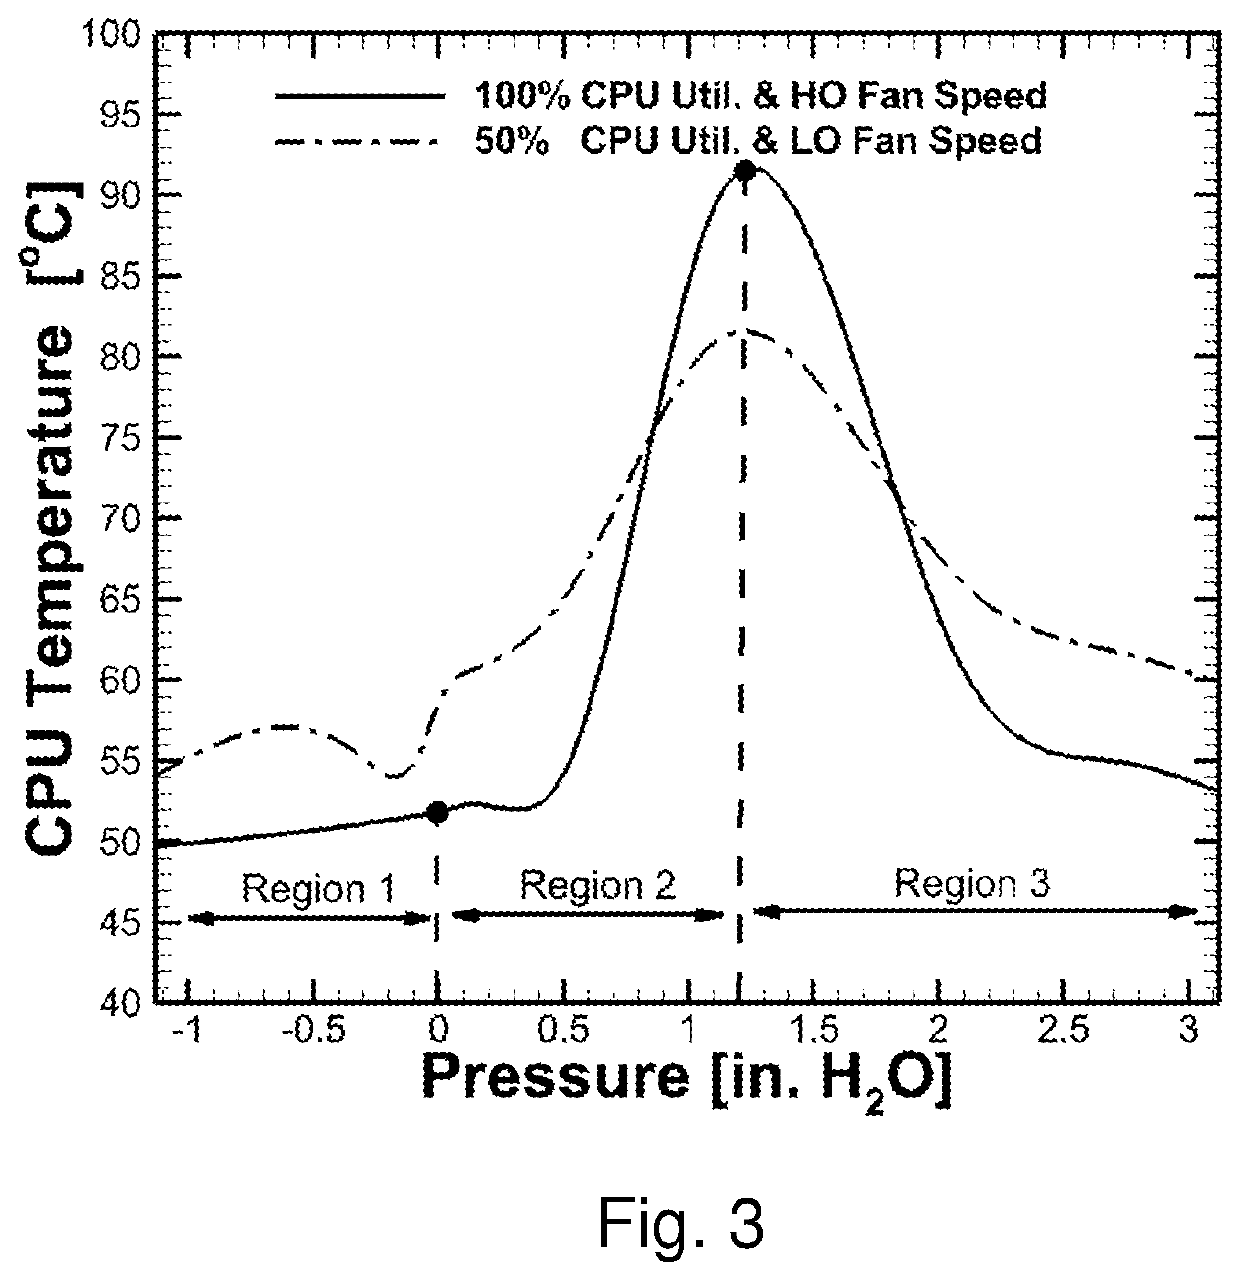 Control systems and prediction methods for it cooling performance in containment